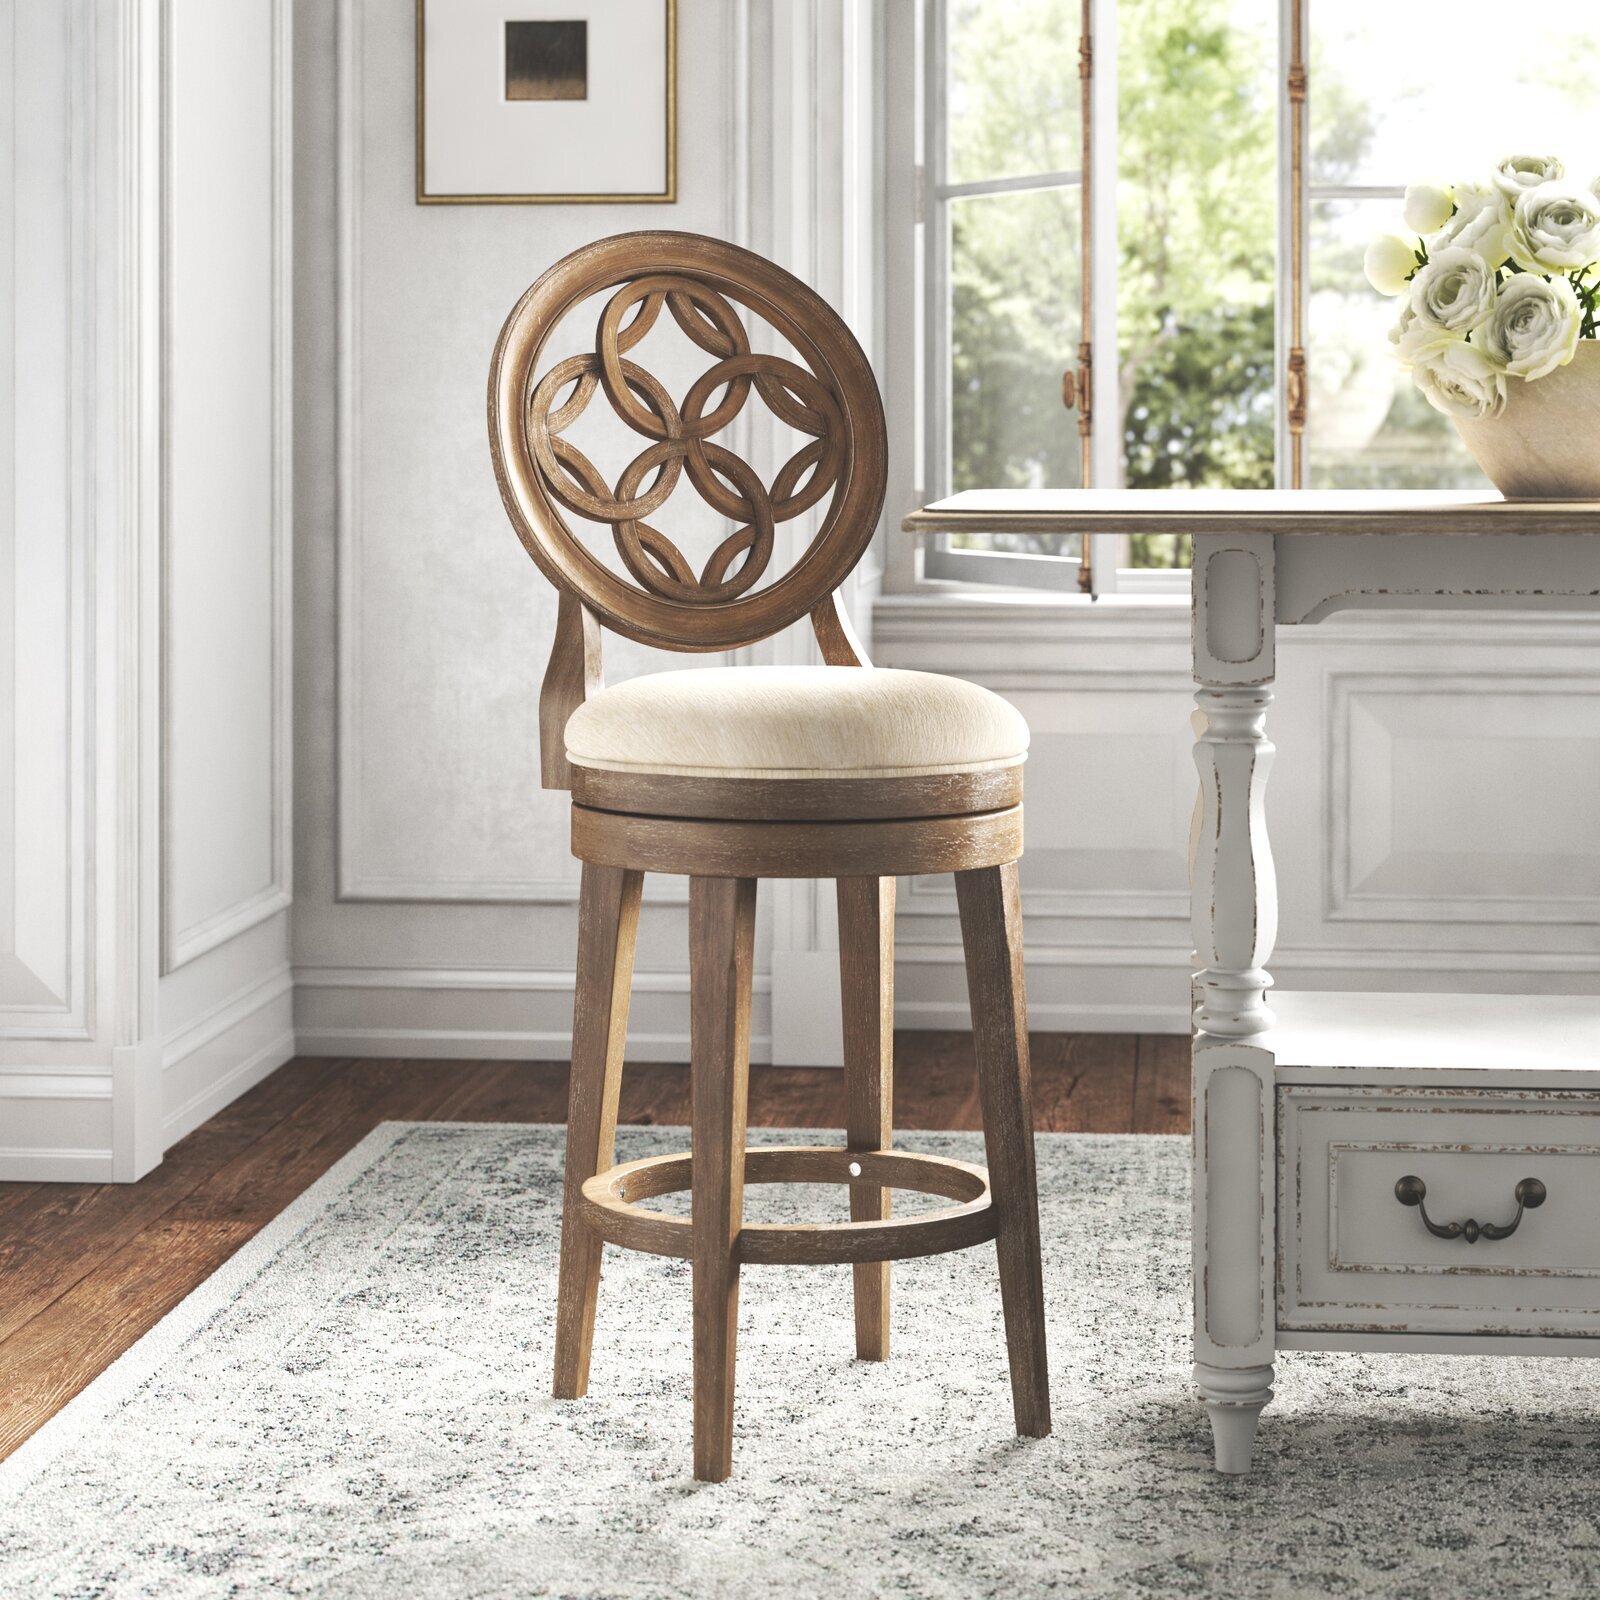 Wooden Swivel Bar Stool With Round Back